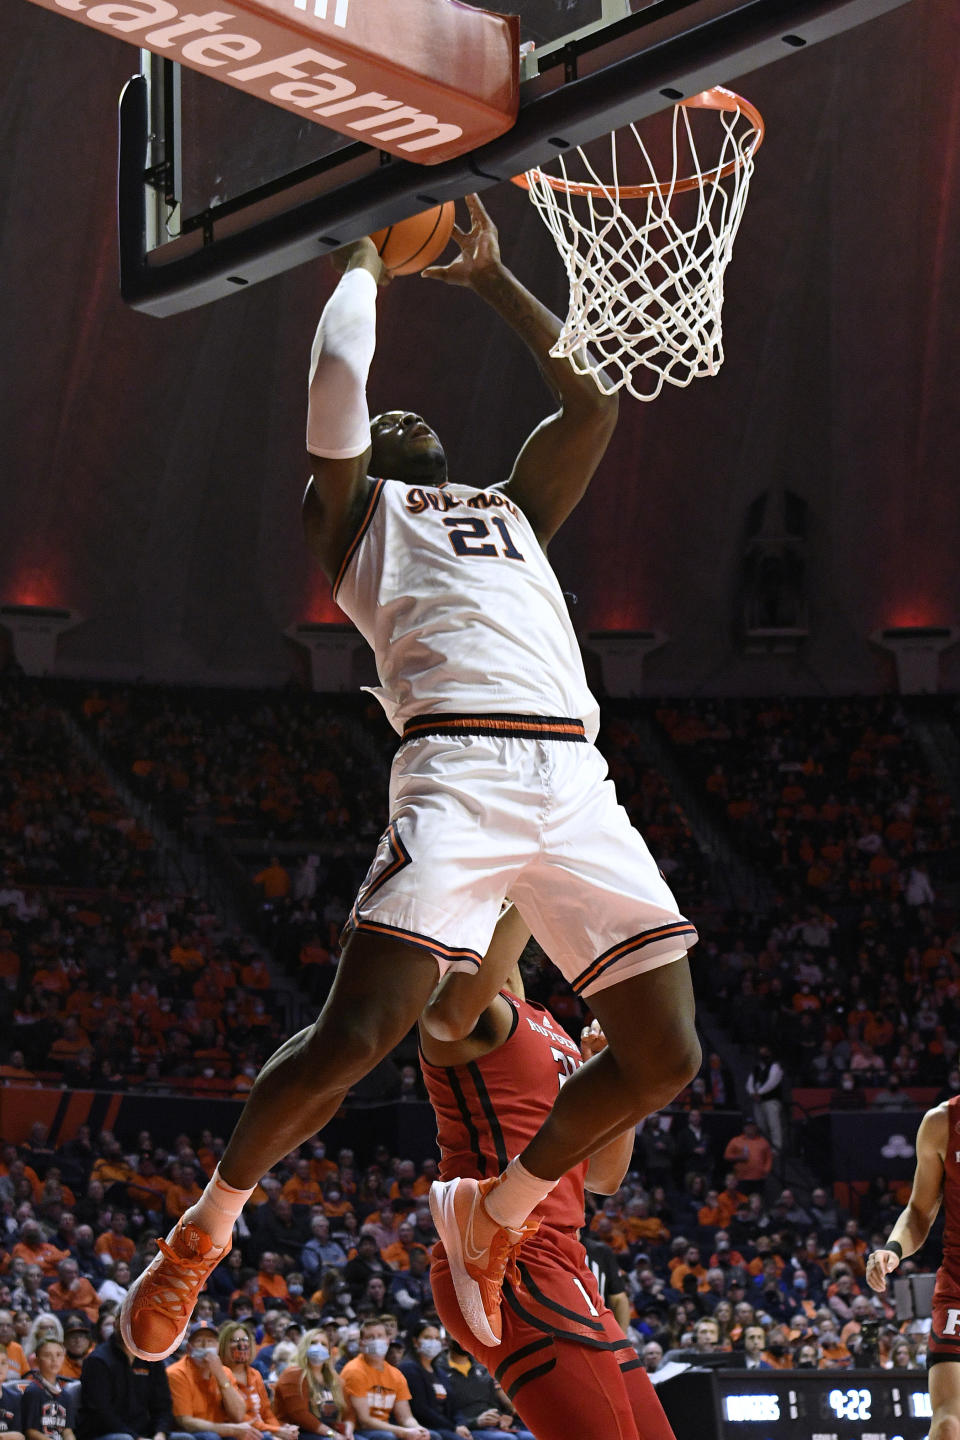 Illinois' Kofi Cockburn dunks during the first half of the team's NCAA college basketball game against Rutgers on Friday, Dec. 3, 2021, in Champaign, Ill. (AP Photo/Michael Allio)